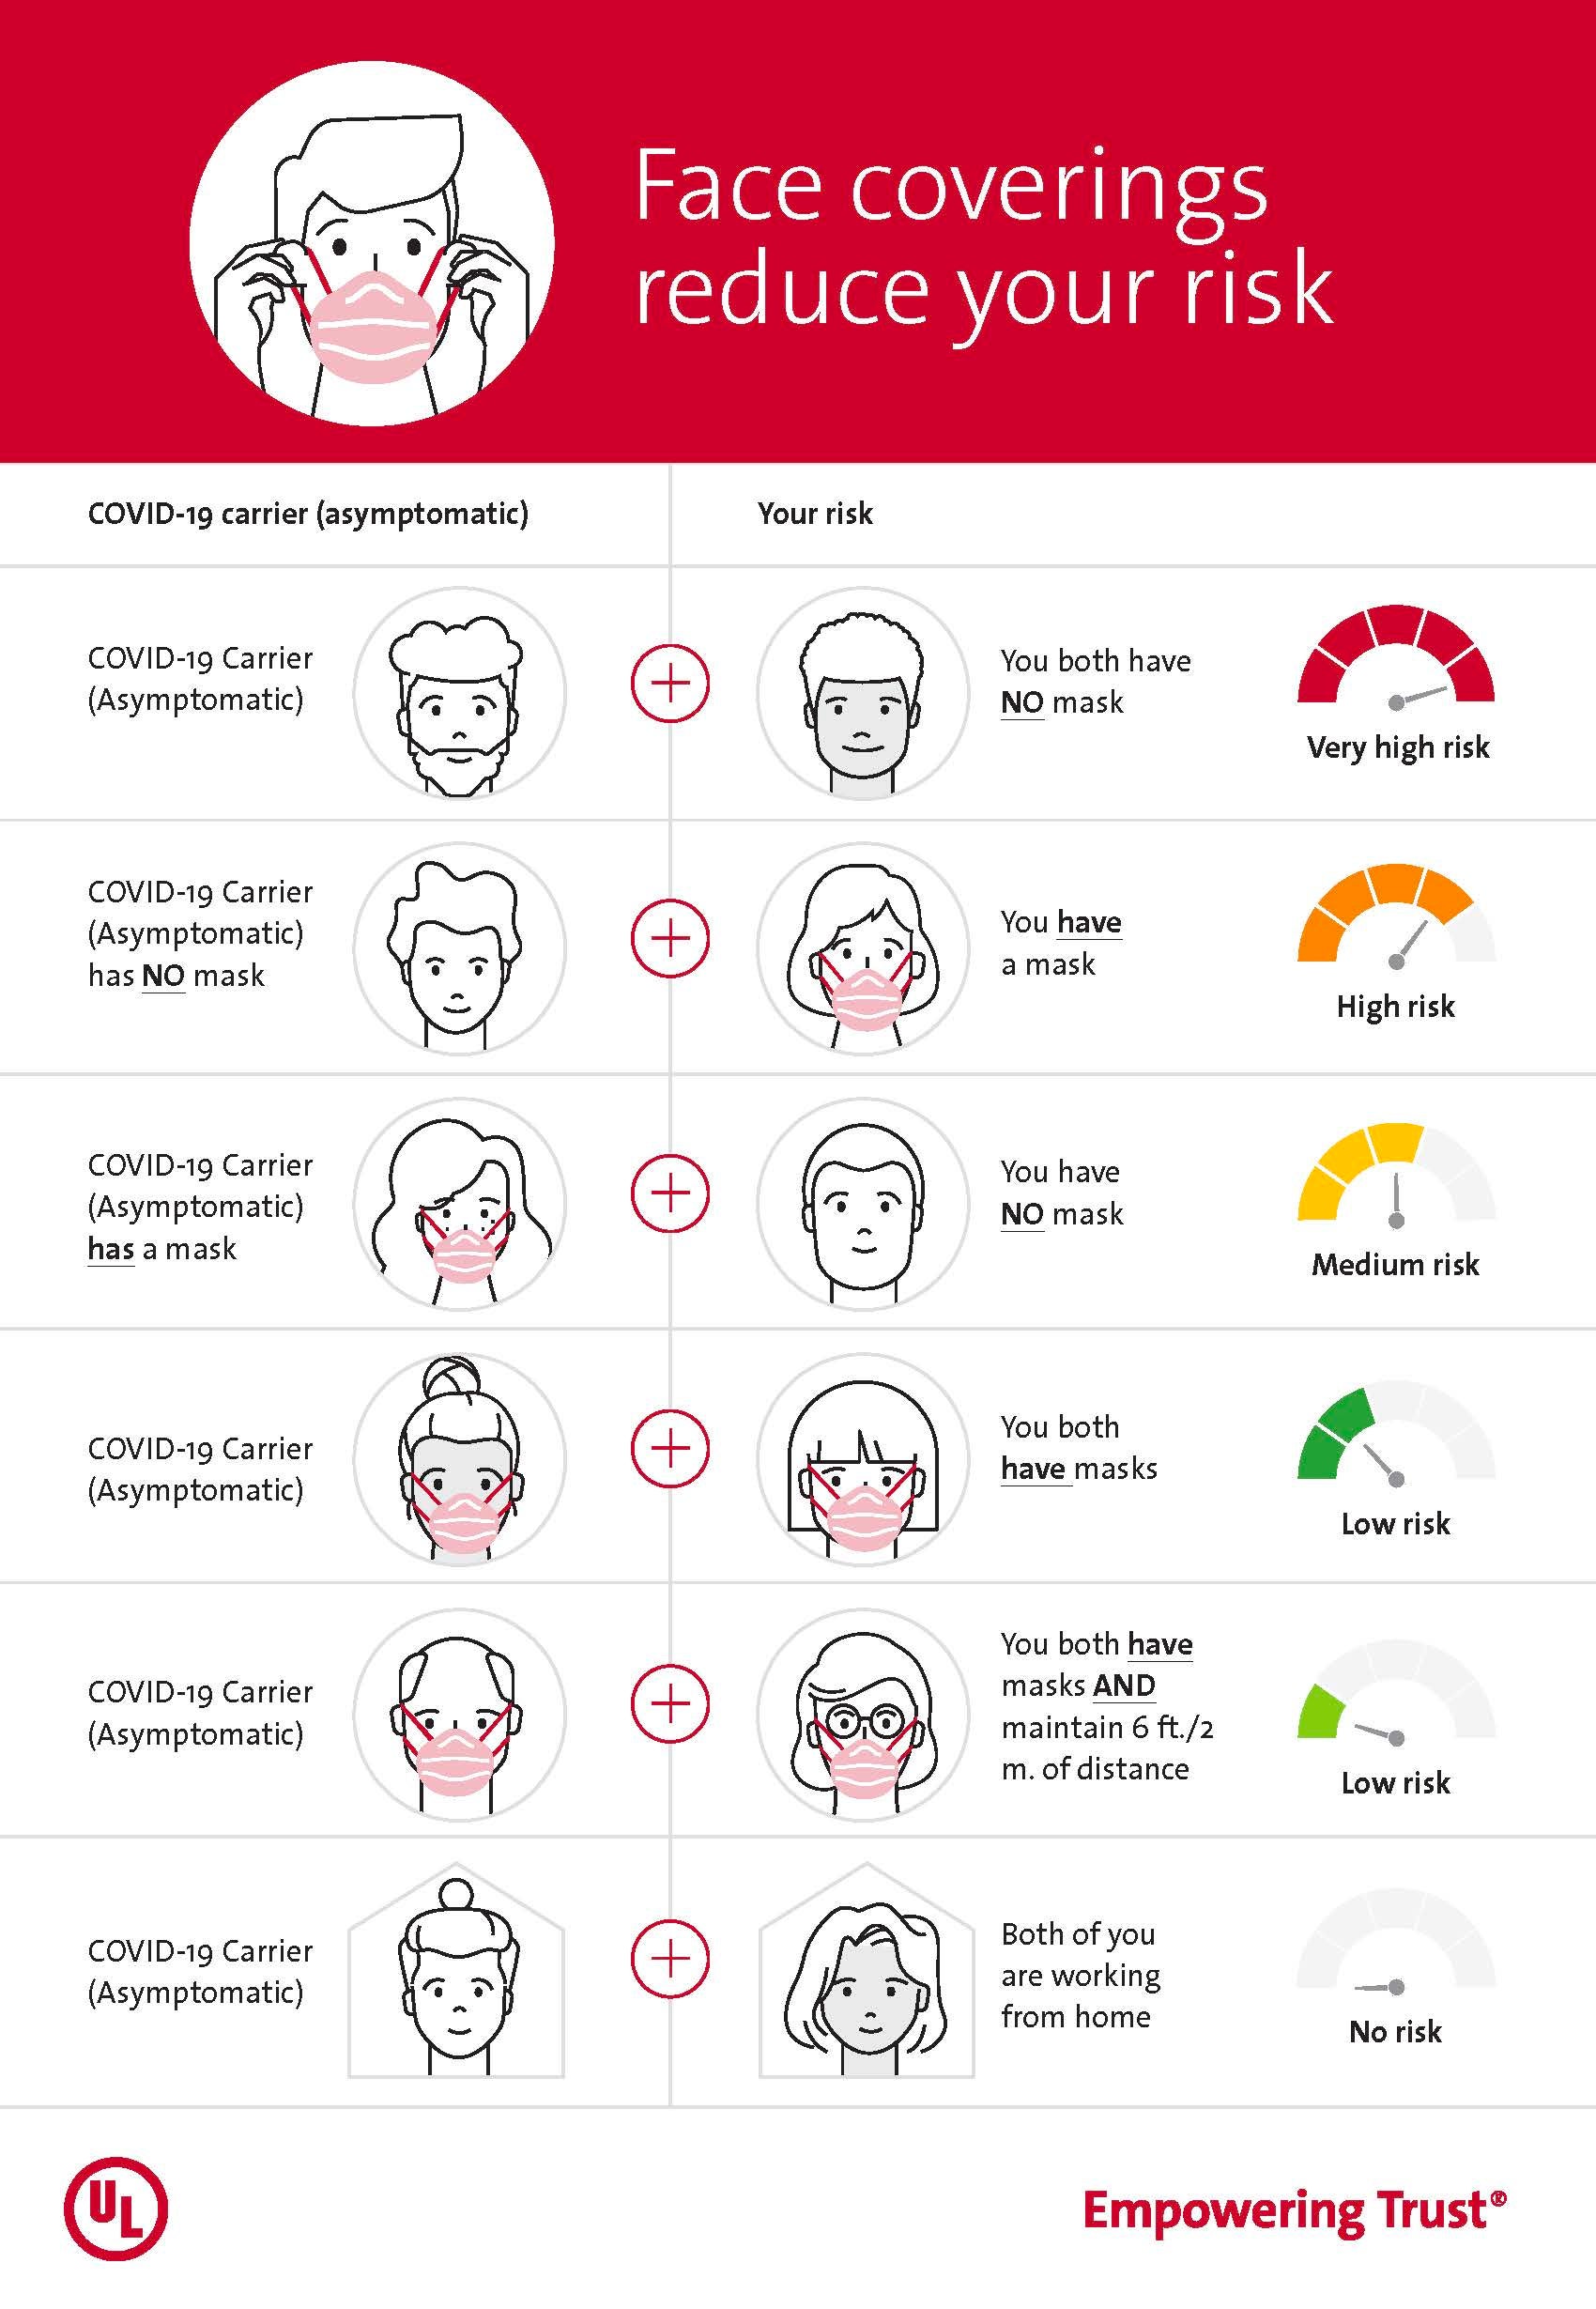 The UL Start Safe Playbook outlines some considerations for more safely returning to work in the wake of the COVID-19 pandemic. This infographic explains the importance of face coverings for reducing transmission risk.